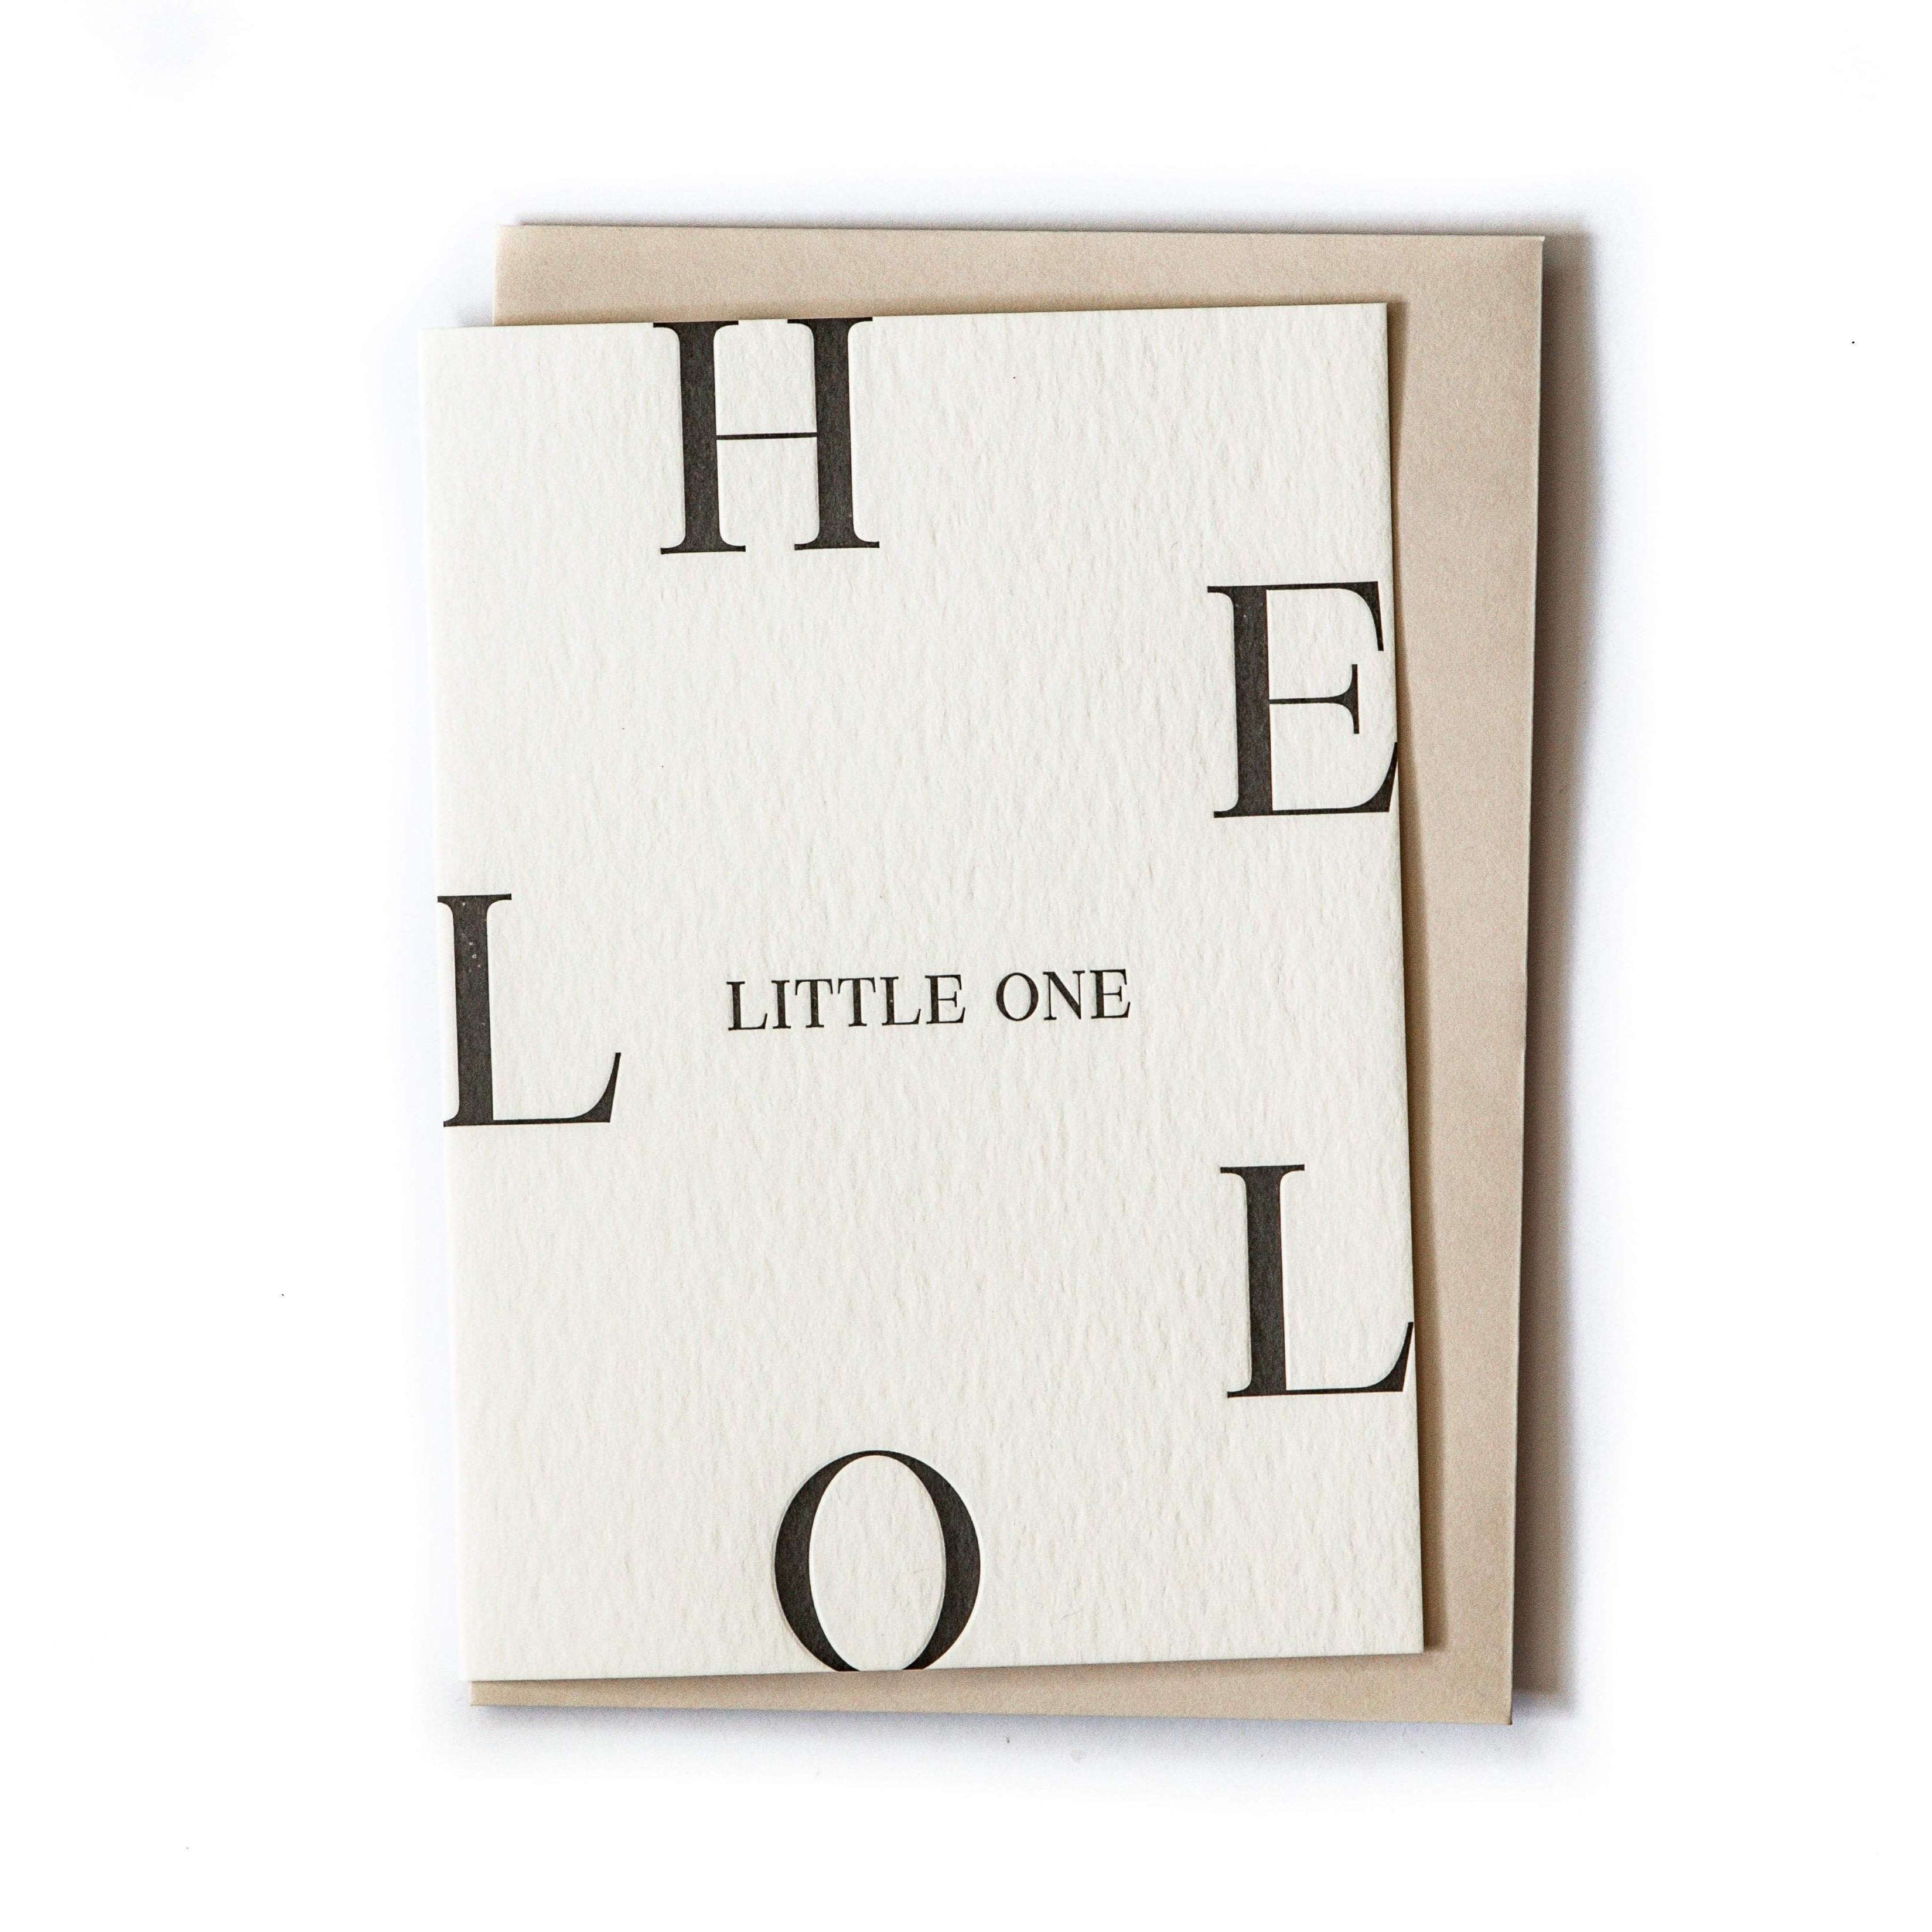 greeting cards Hello little one by Clare Bernadette